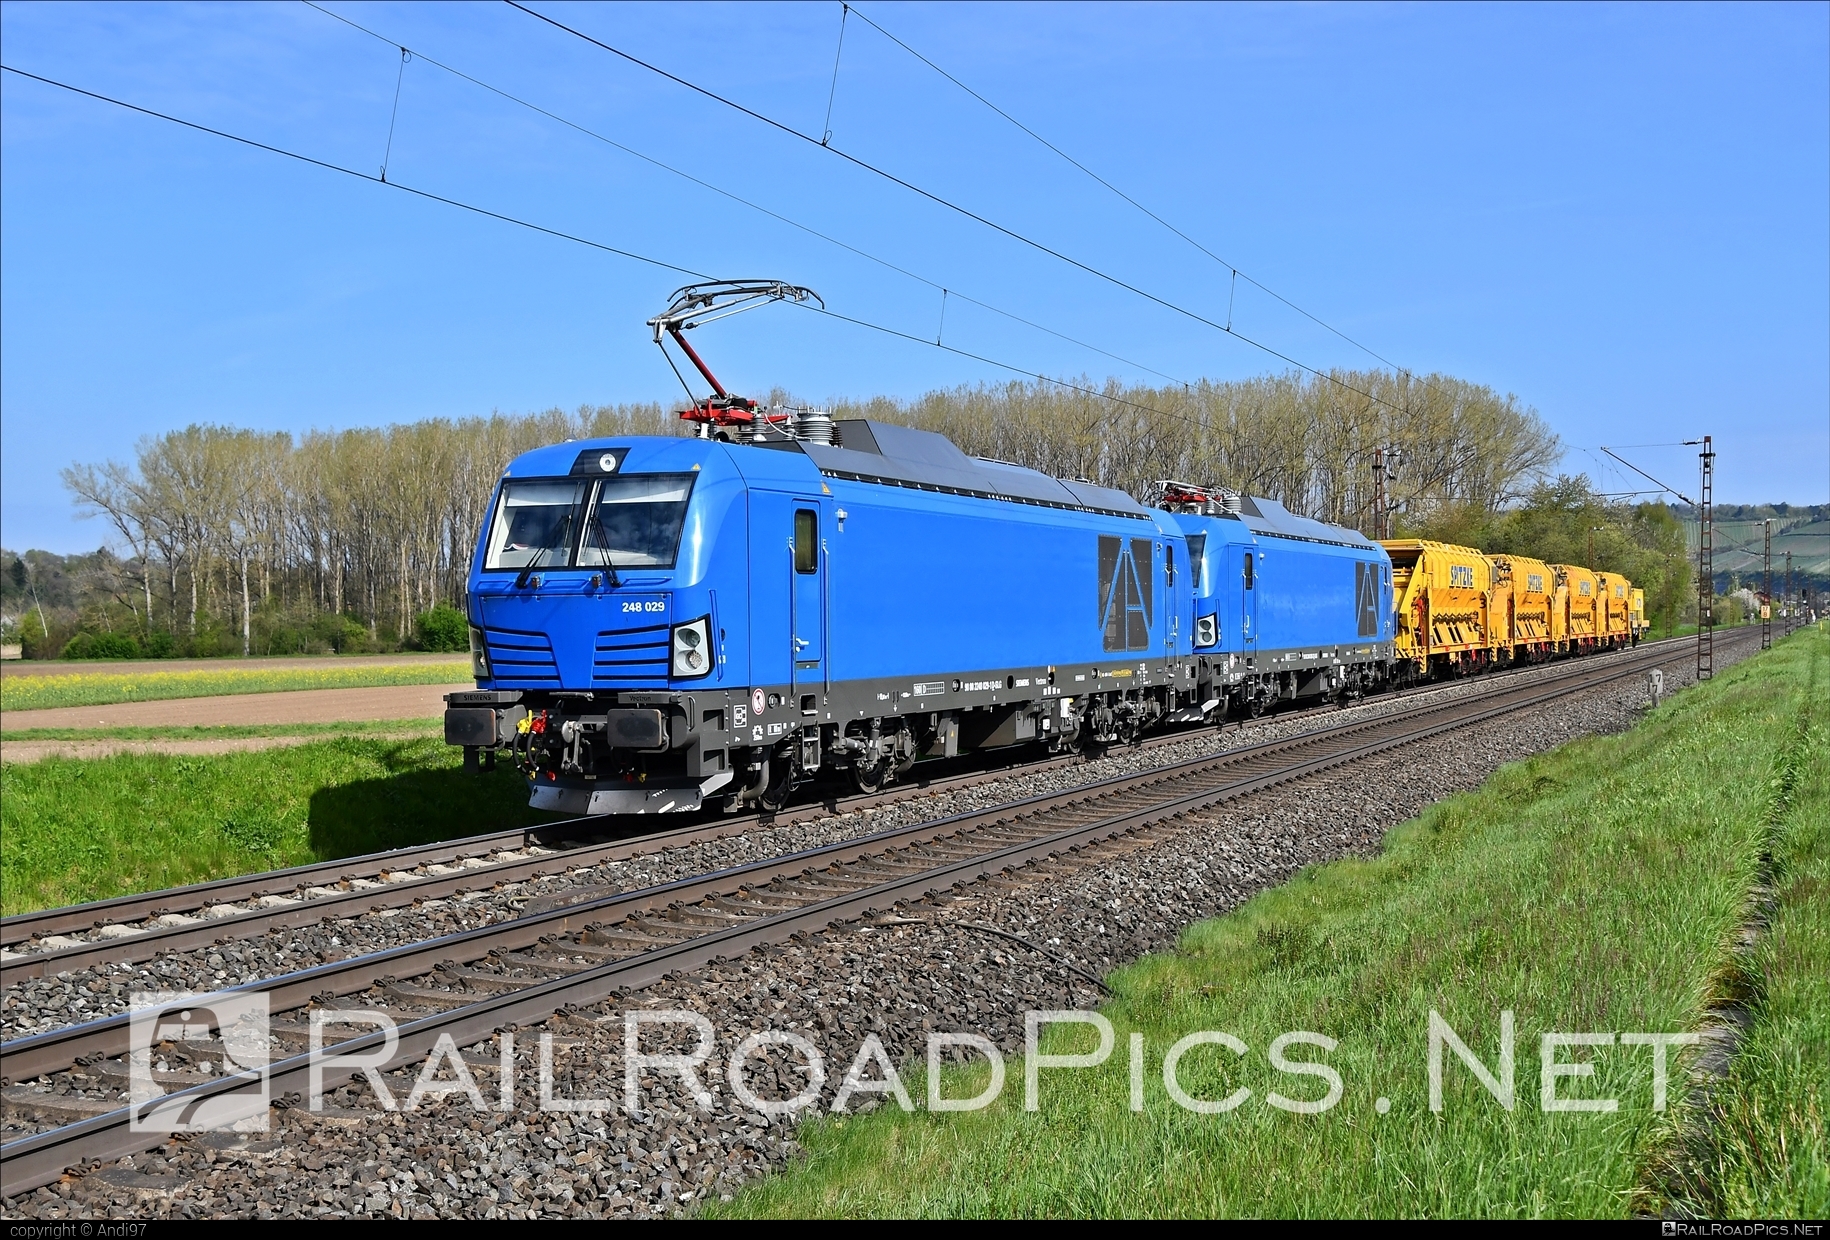 Siemens Vectron Dual Mode - 248 029 operated by Spitzke Logistik GmbH #siemens #siemensVectron #siemensVectronDualMode #slg #spitzke #spitzkelogistik #vectron #vectronDualMode